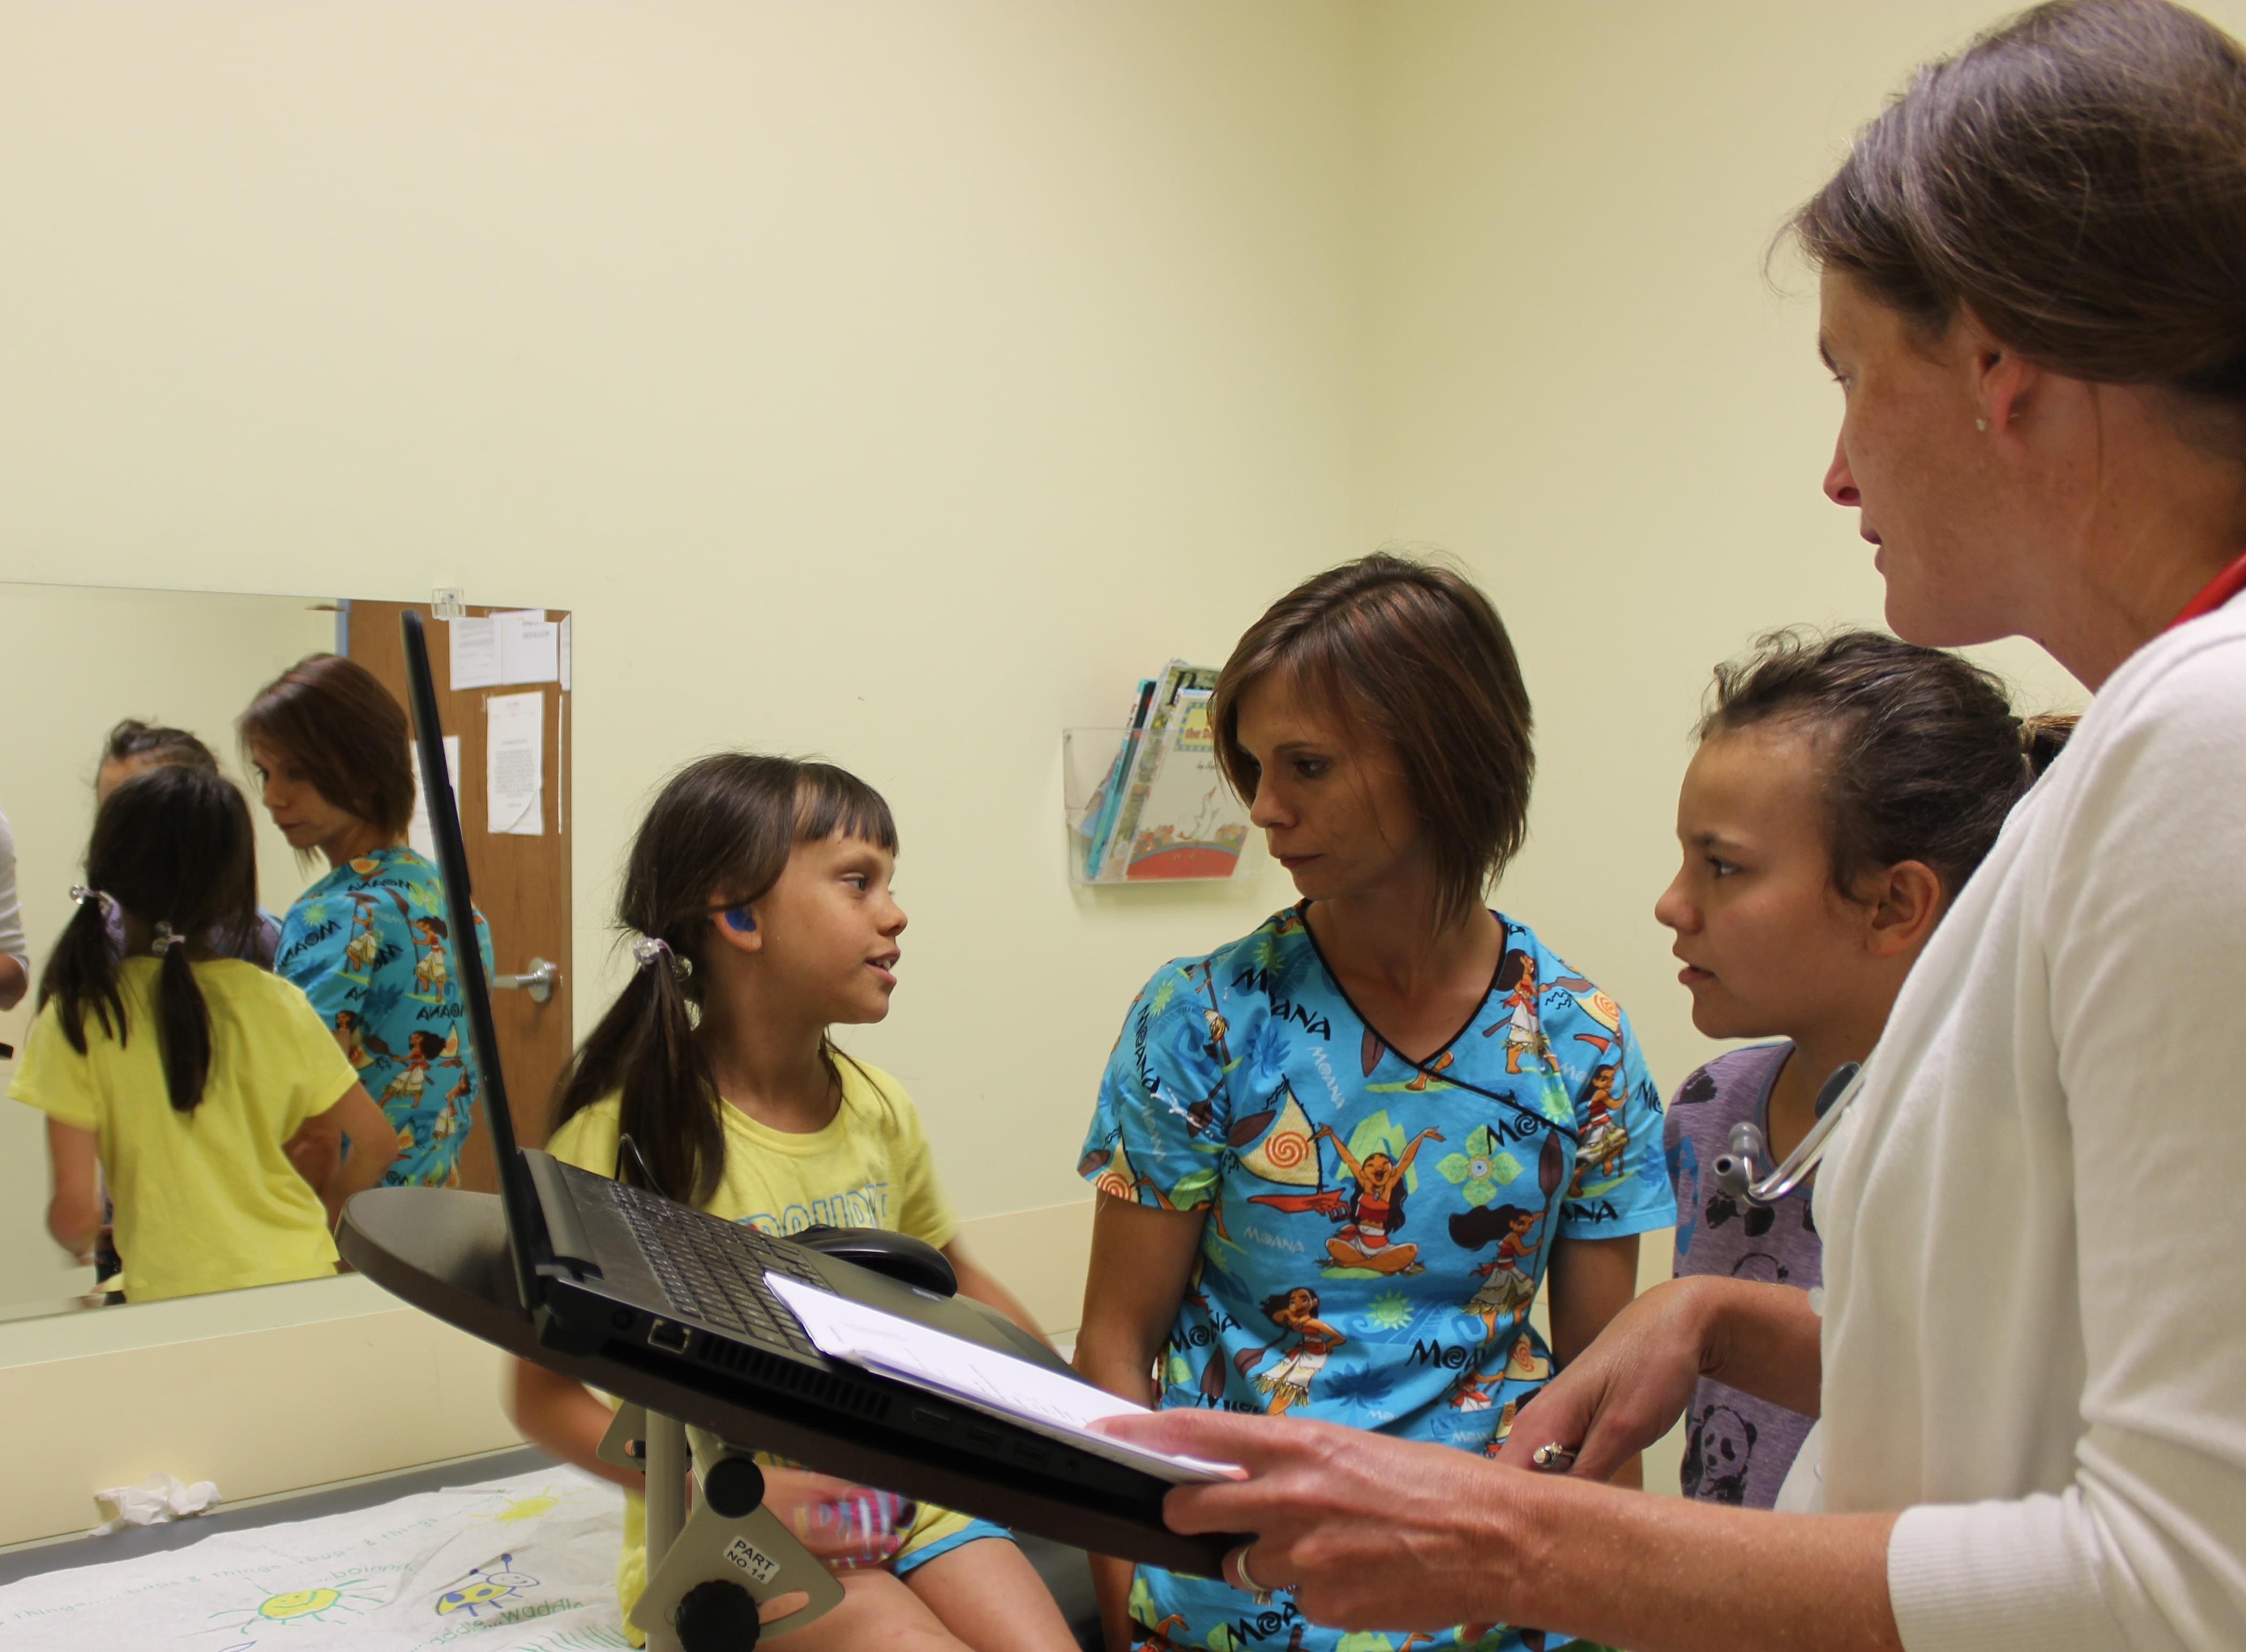 Dr. Kristin Stahl (far right) of Heartland Pediatrics meets with patient, Makayla (far left), who came in for a physical exam on July 26 along with her mother, Wendy Kelly, and older sister, Laney.